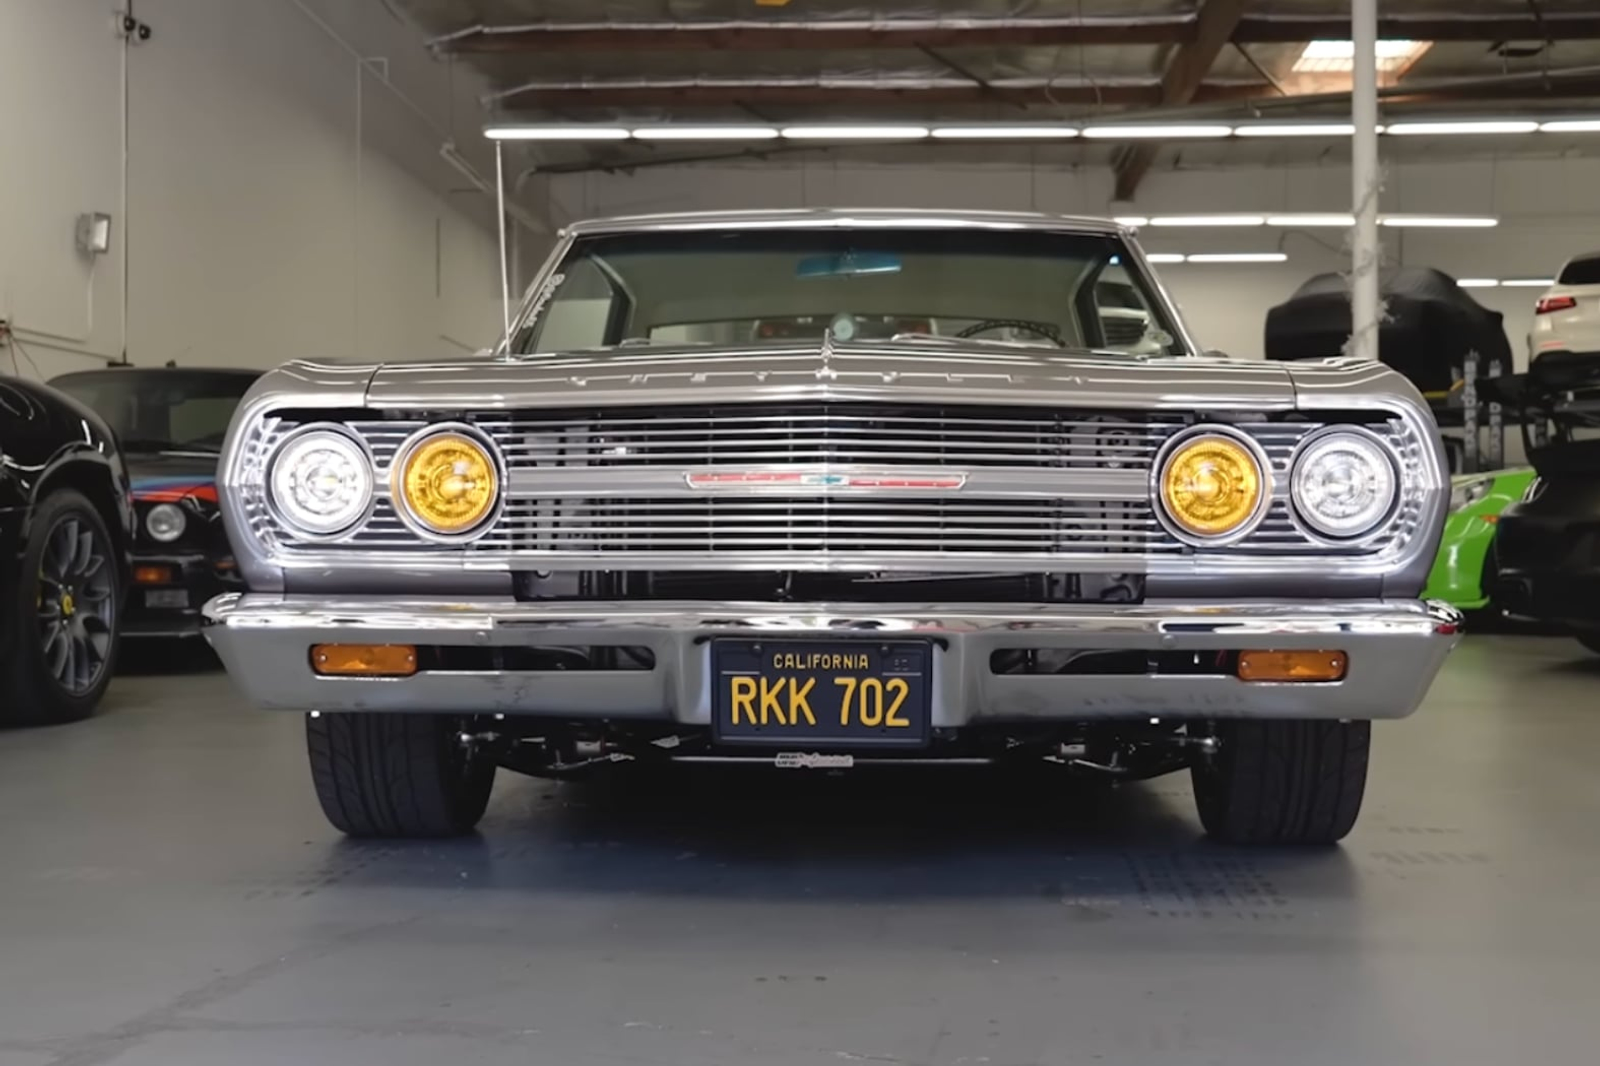 video, tuning, muscle cars, garage-built chevy chevelle is a clean restomod worthy of your attention